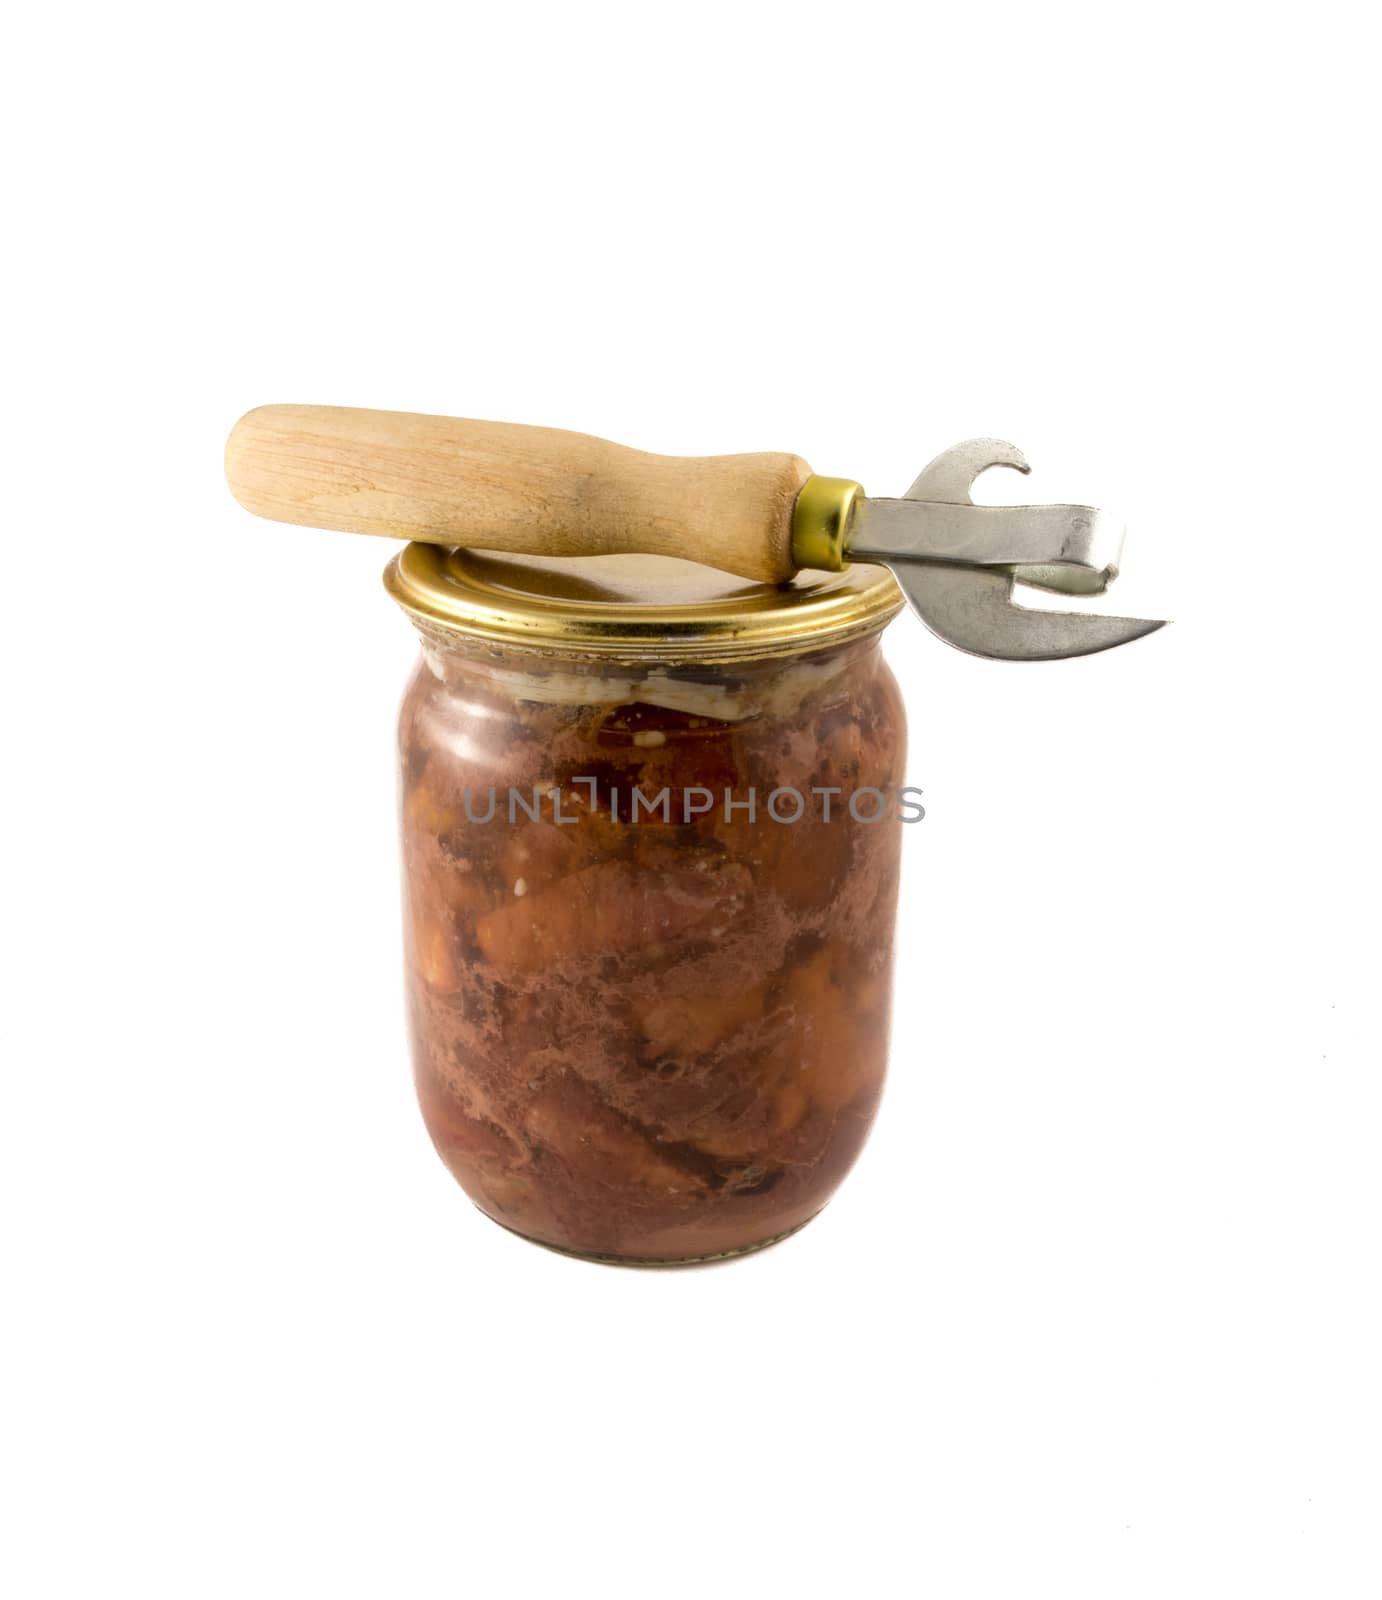 stew and a bottle opener on white background